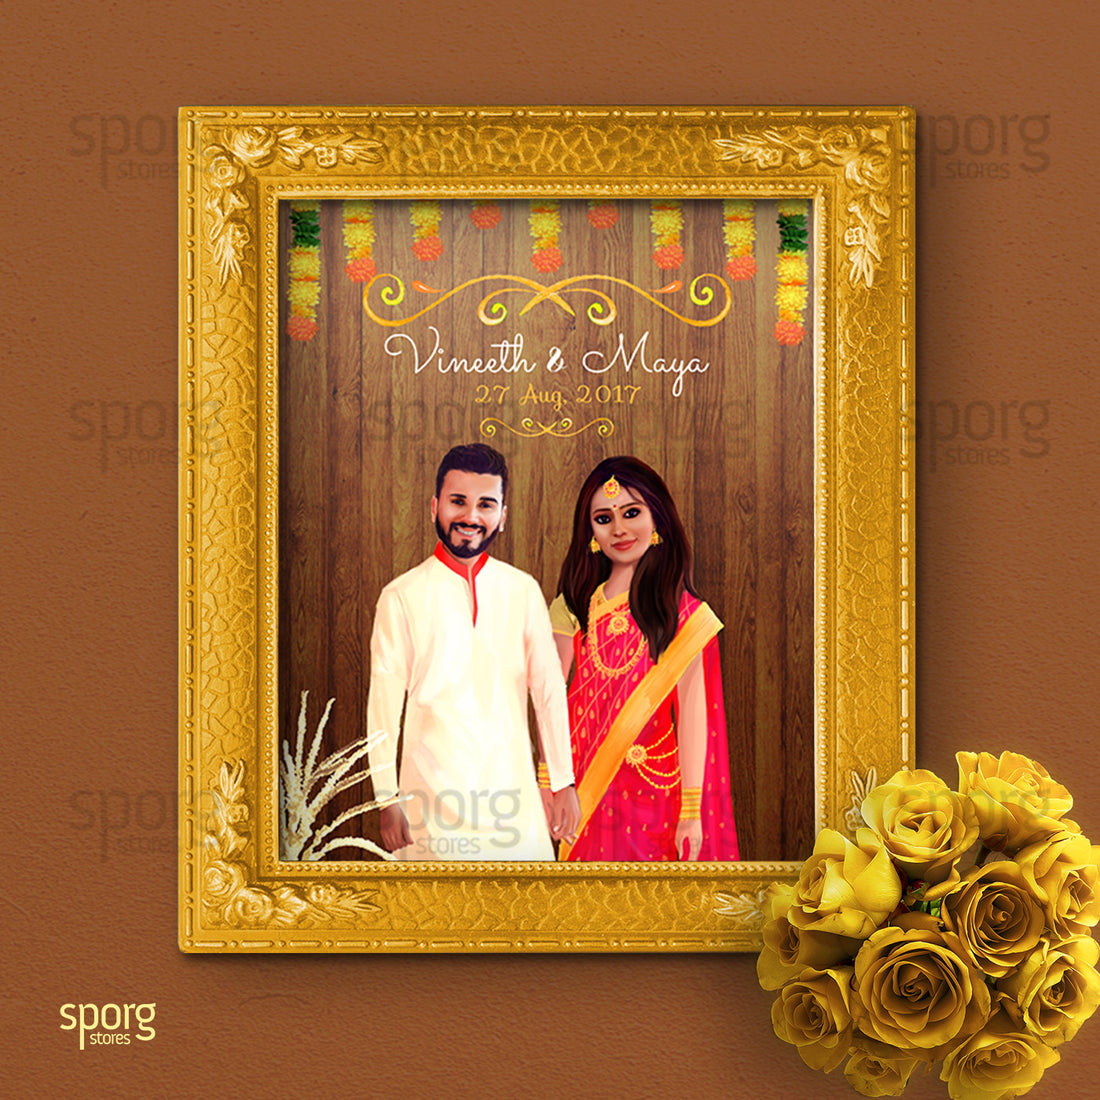 Illustrated Indian wedding invitation - From concept to card